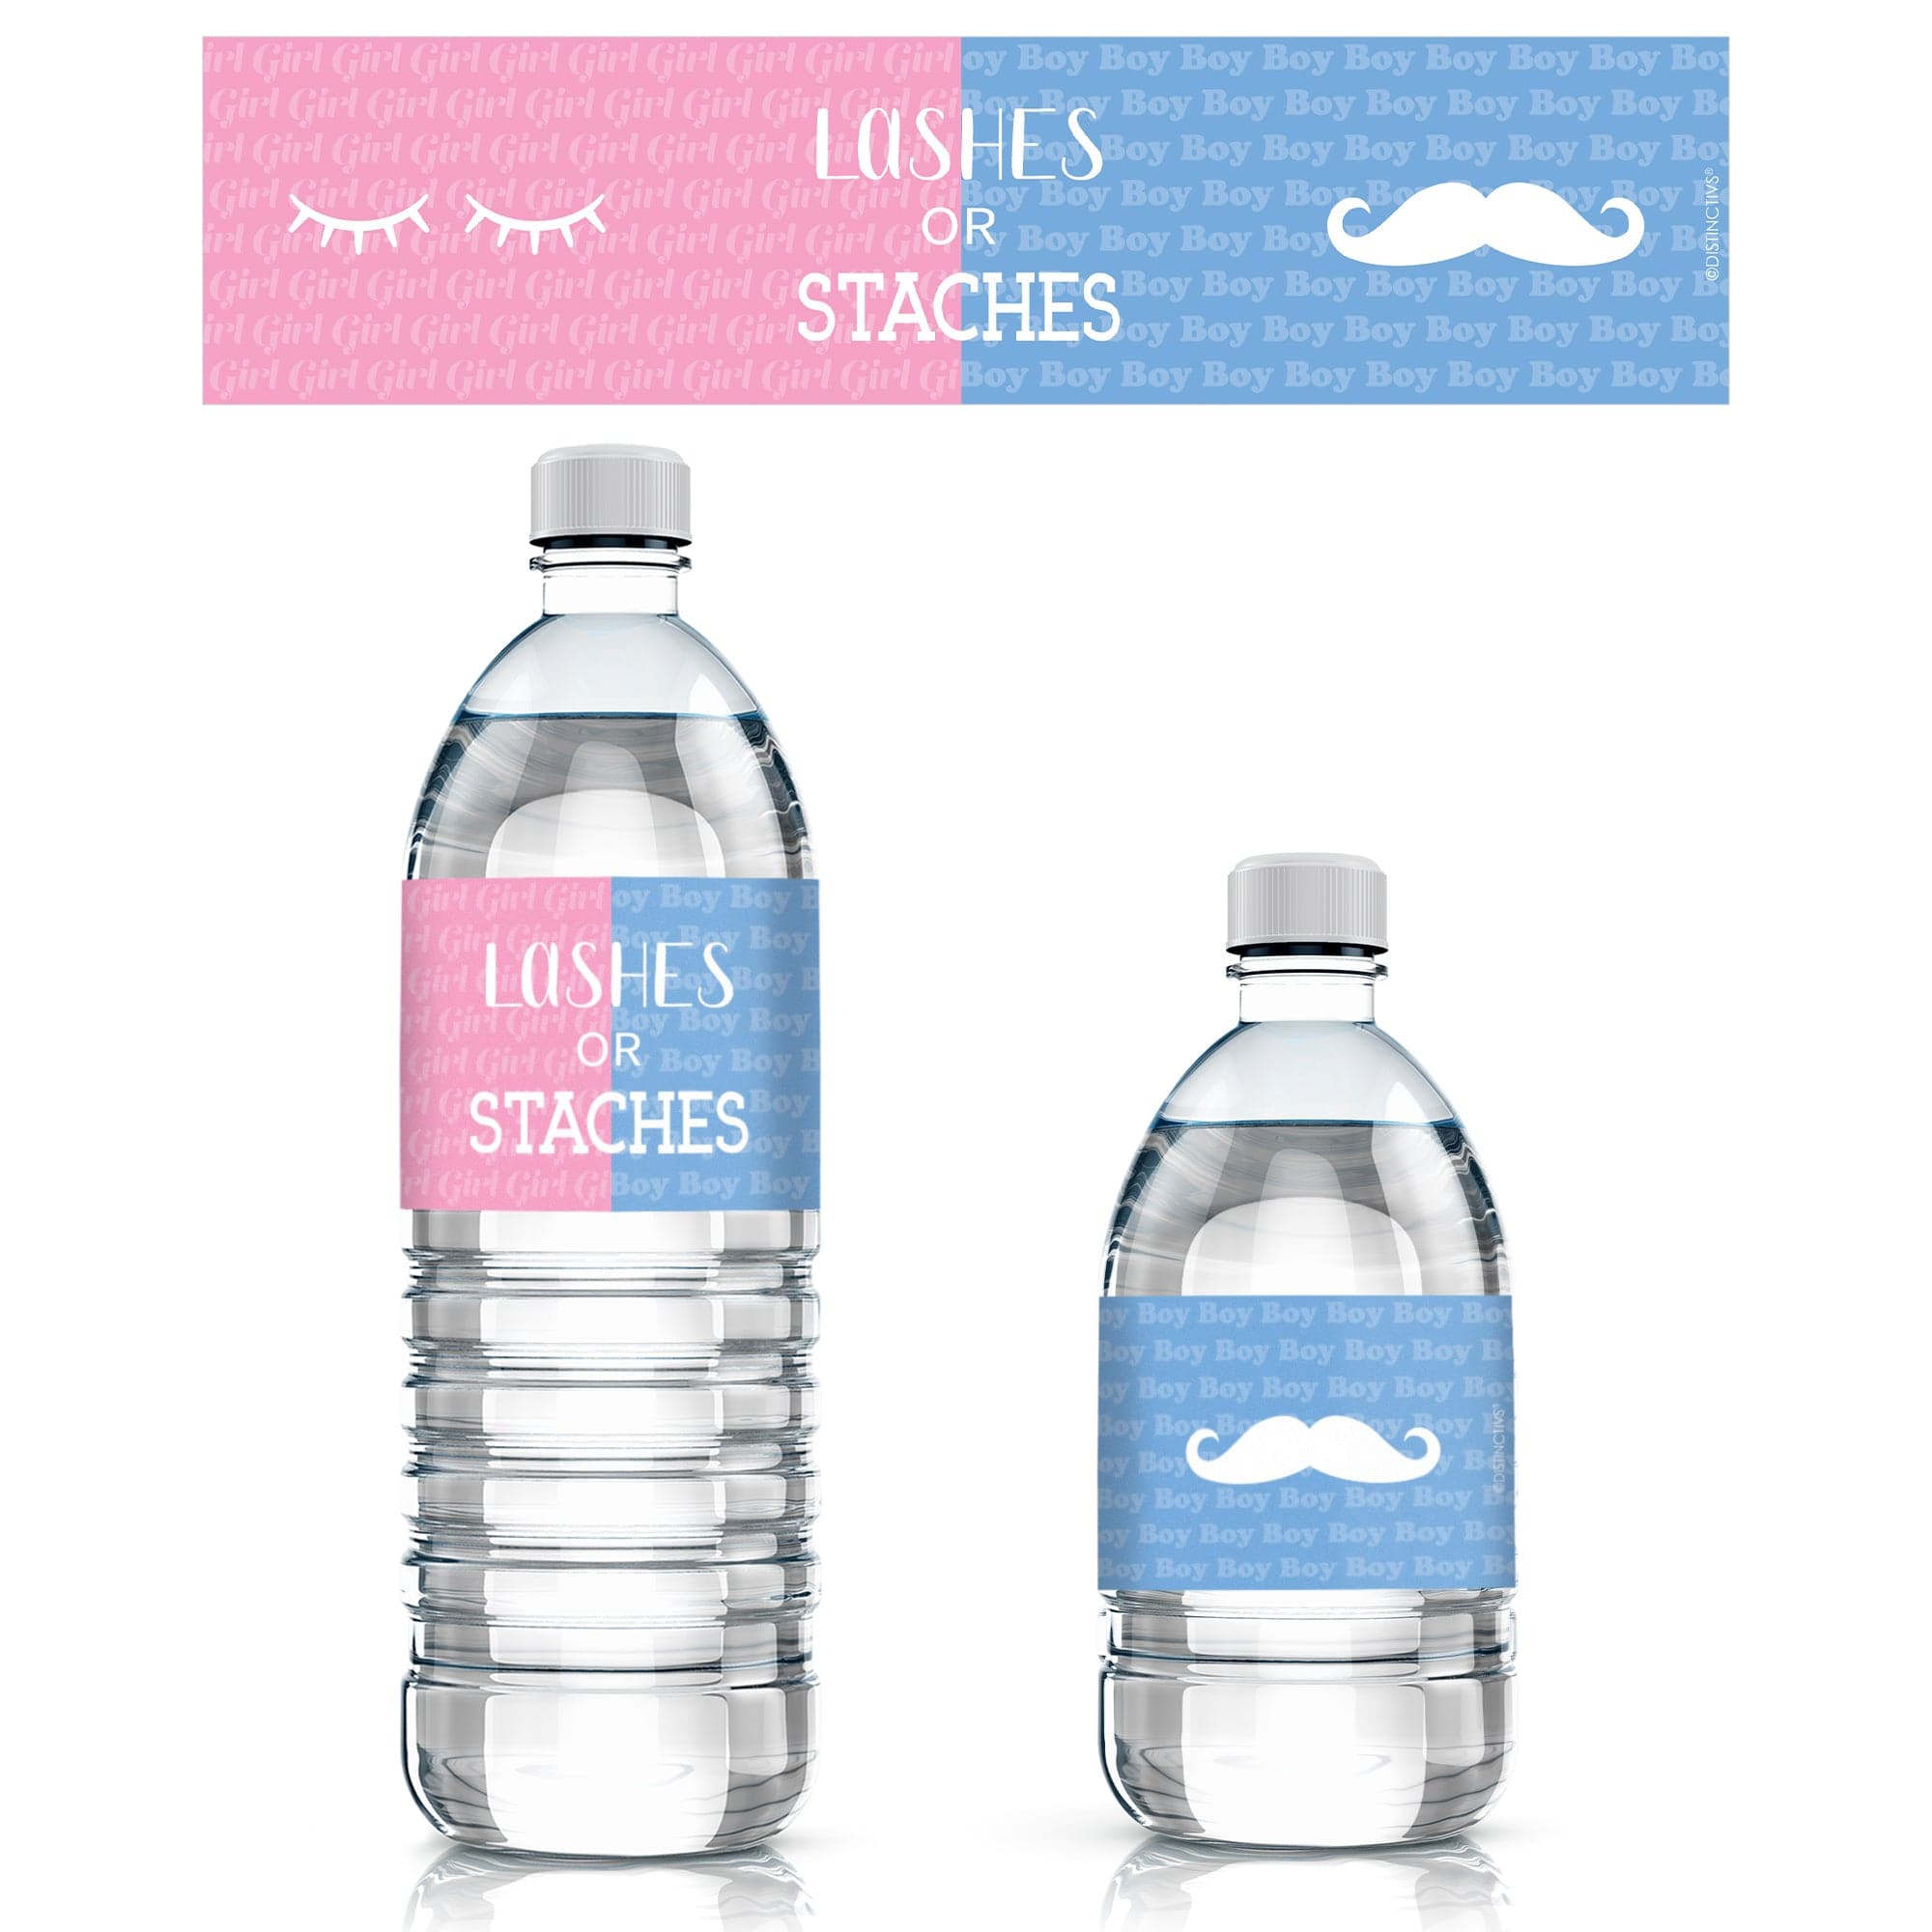 https://cdn.shopify.com/s/files/1/0734/7909/products/lashes-or-staches-gender-reveal-party-water-bottle-labels-24-count-32496835723435.jpg?v=1660276325&width=370%20370w